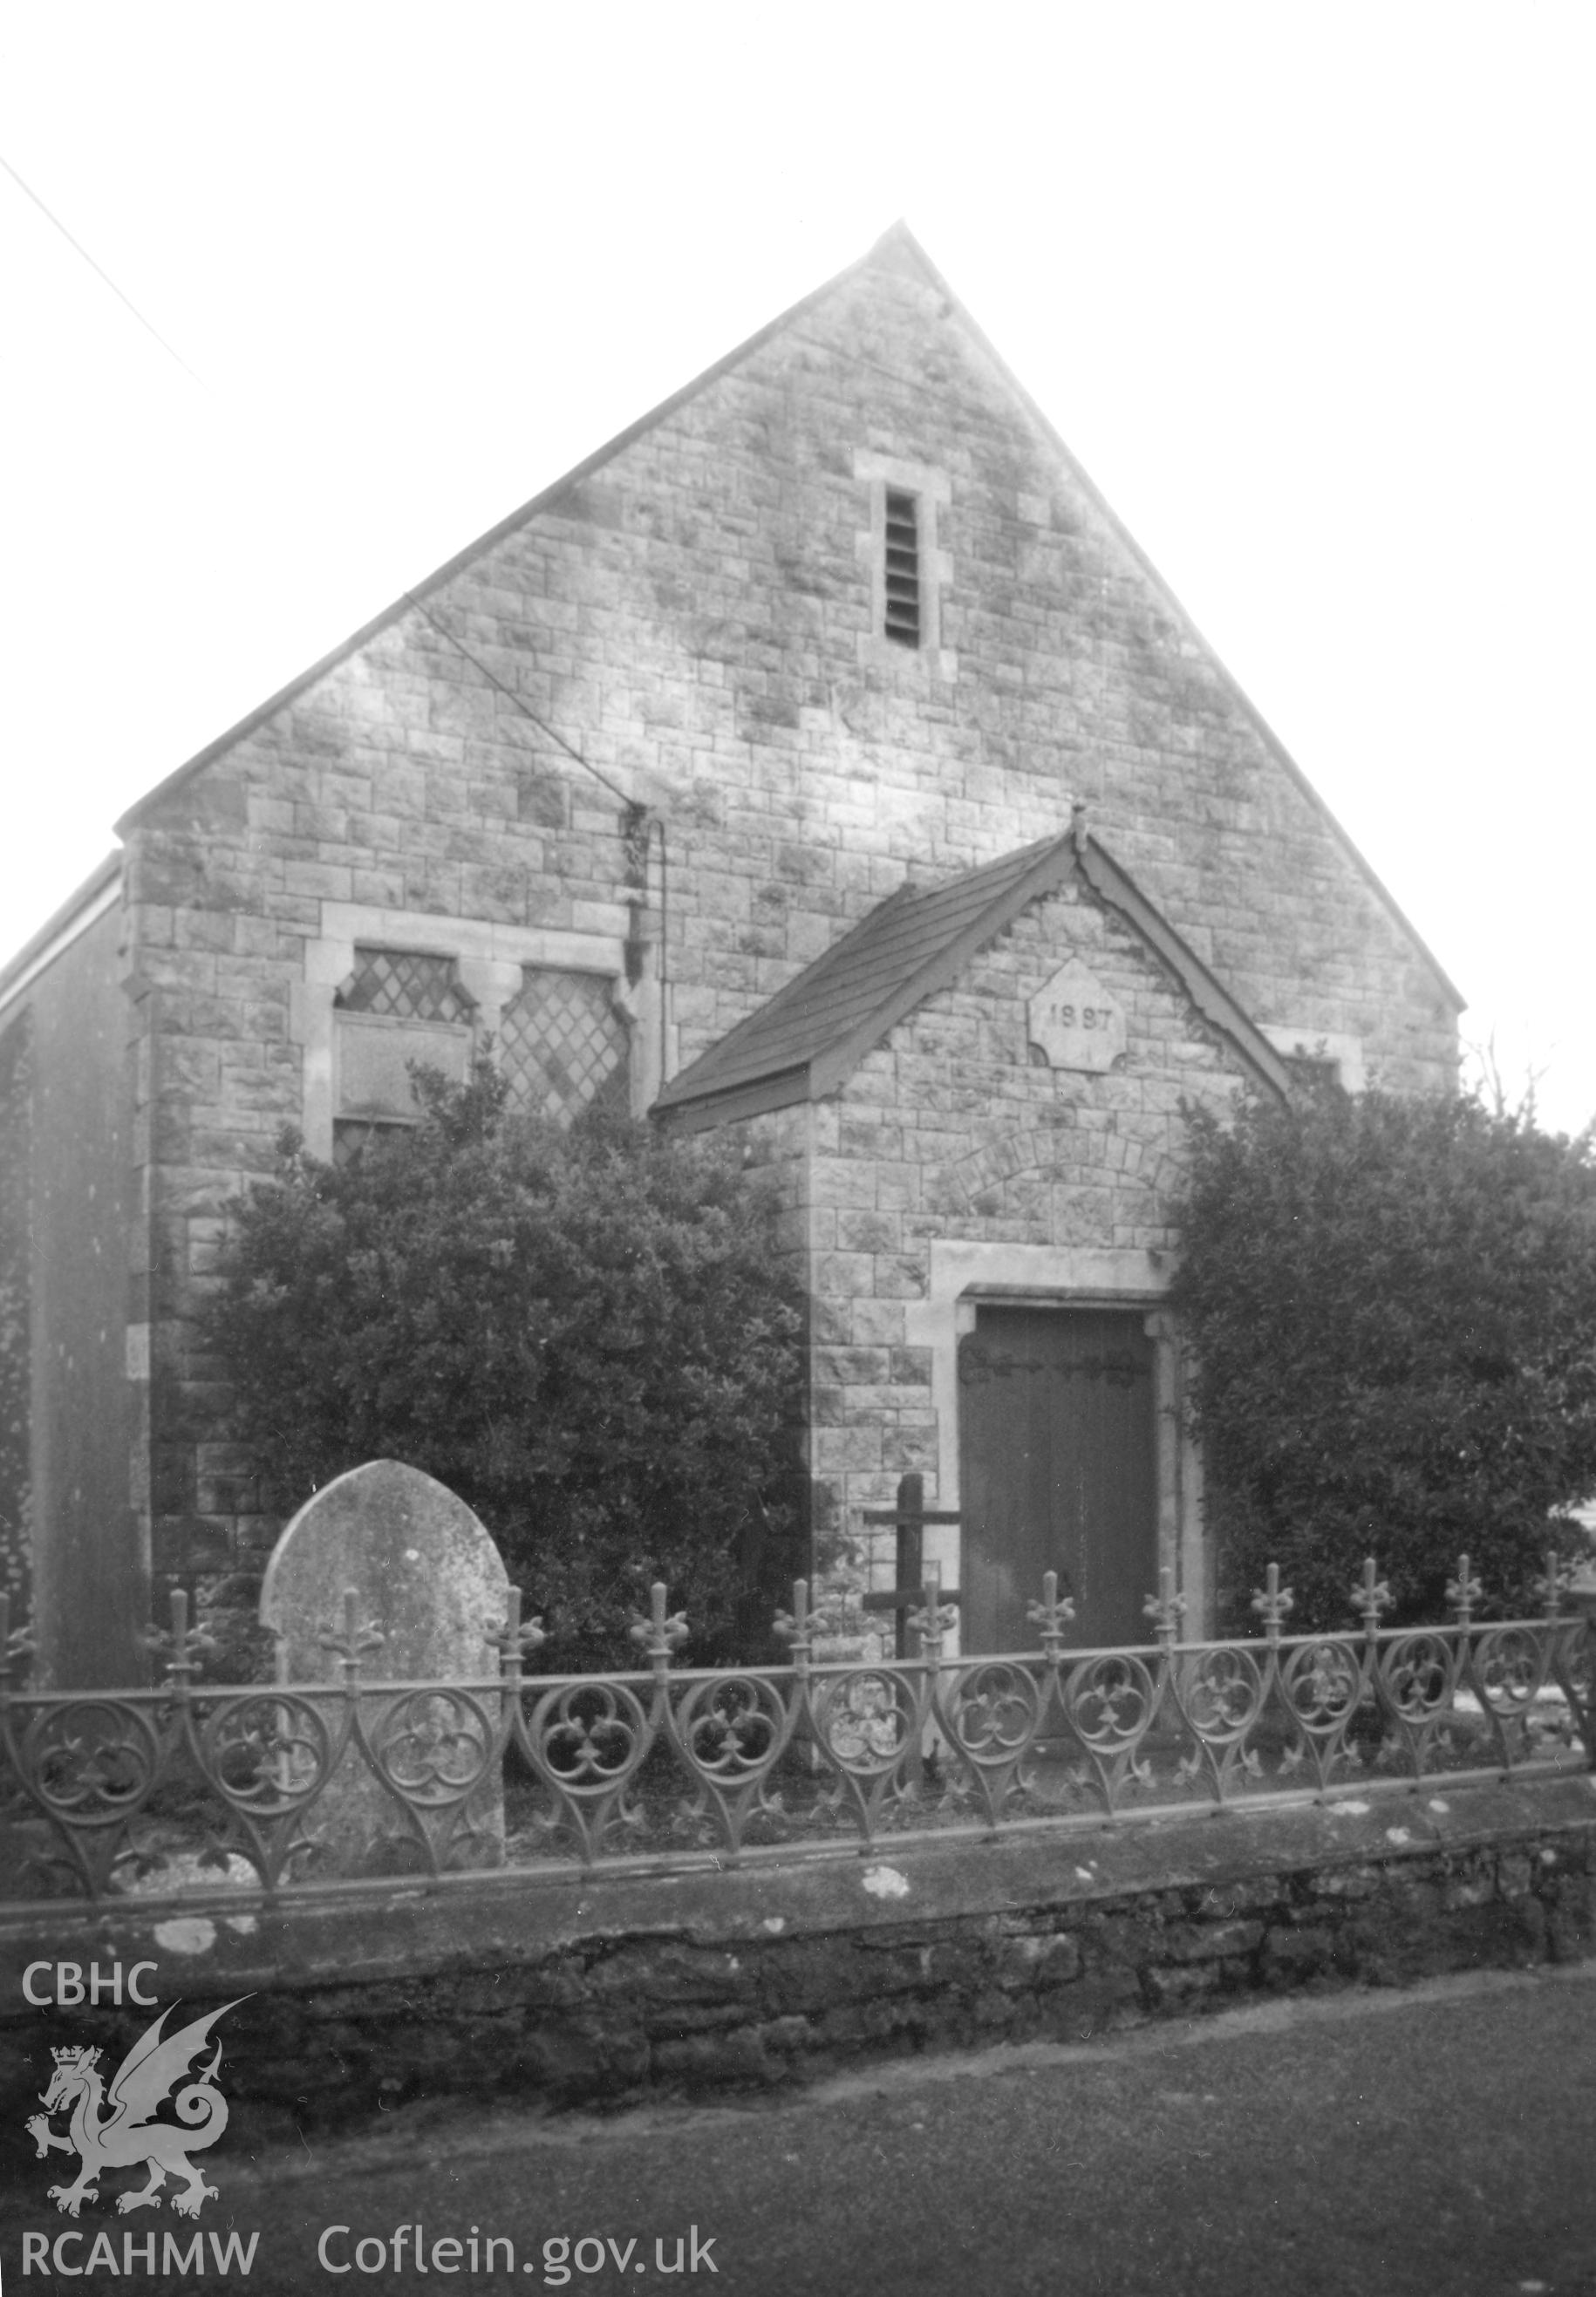 Digital copy of a black and white photograph showing an exterior view of Penally Congregational Chapel,  taken by Robert Scourfield, c.1996.